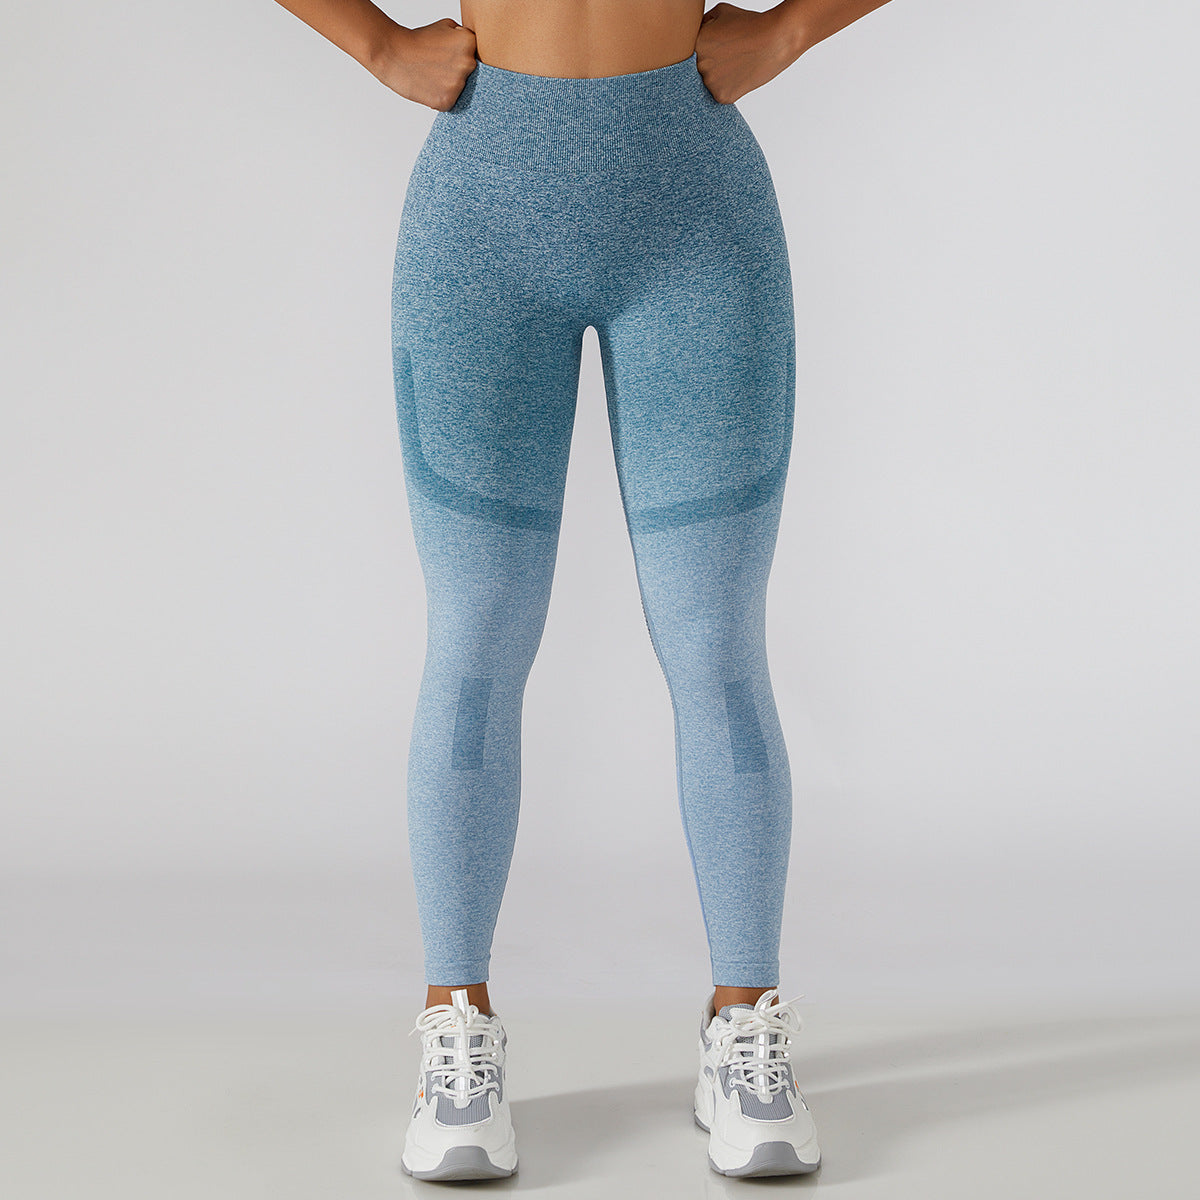 Wholesale Stretchy Skinny Workout leggings